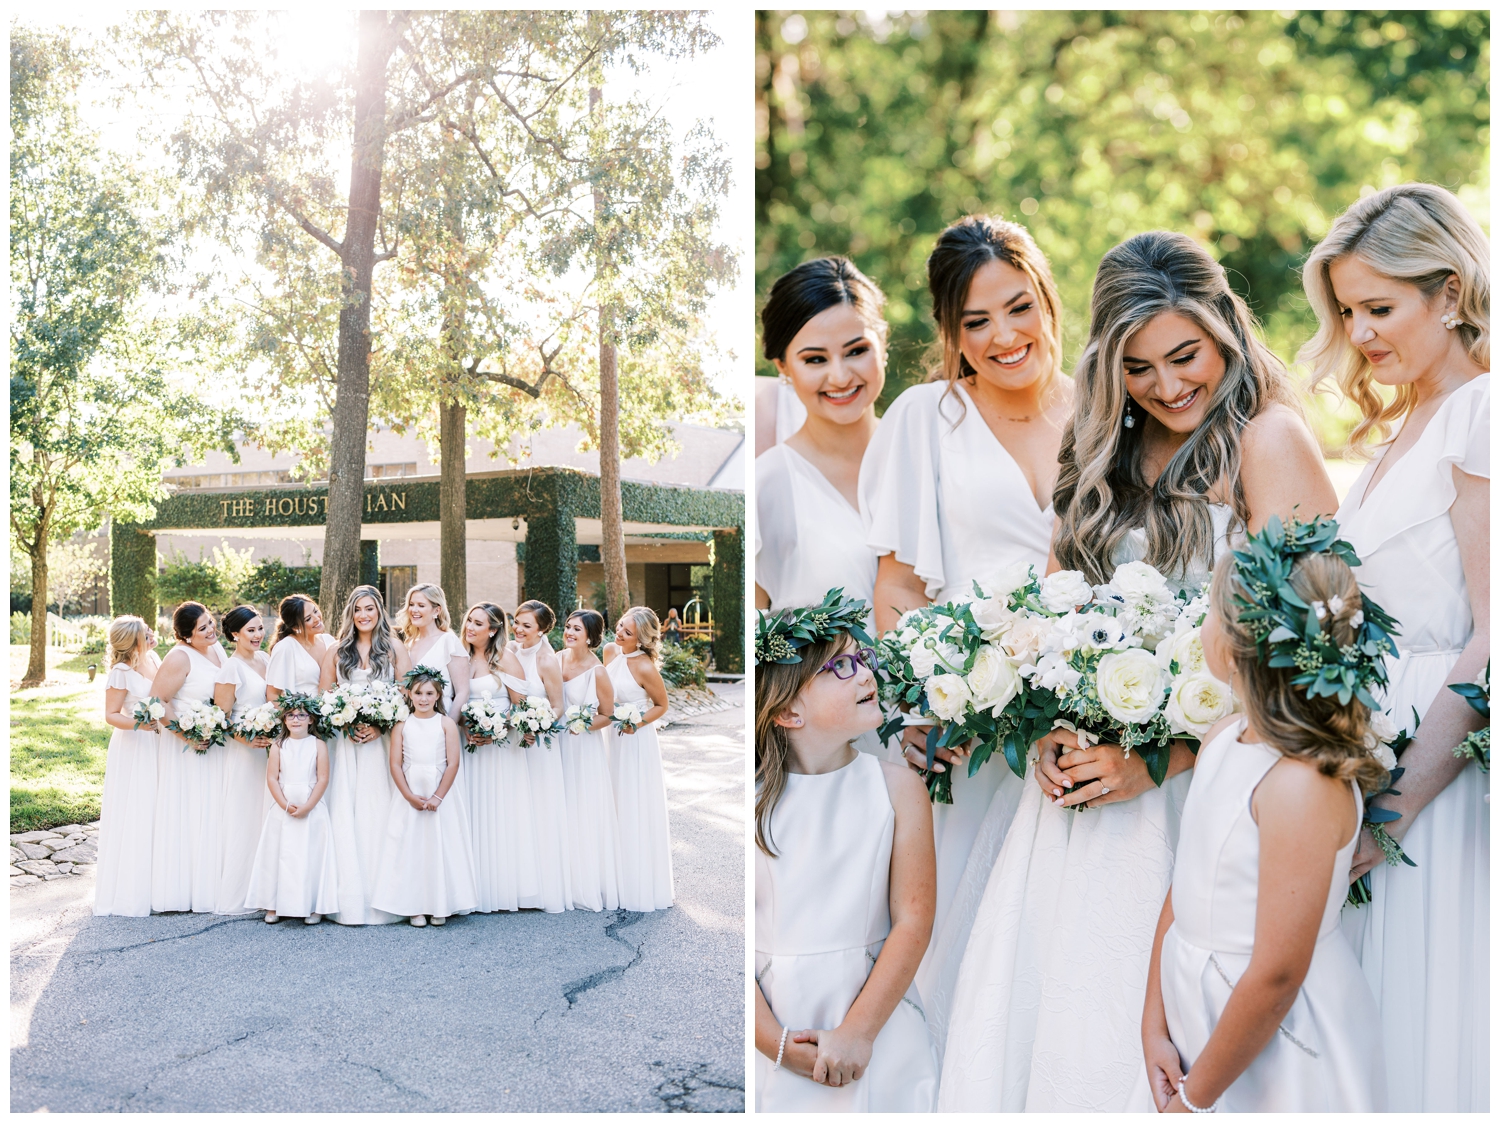 bridal party with all white bridesmaid dresses outside at the Houstonian Hotel wedding